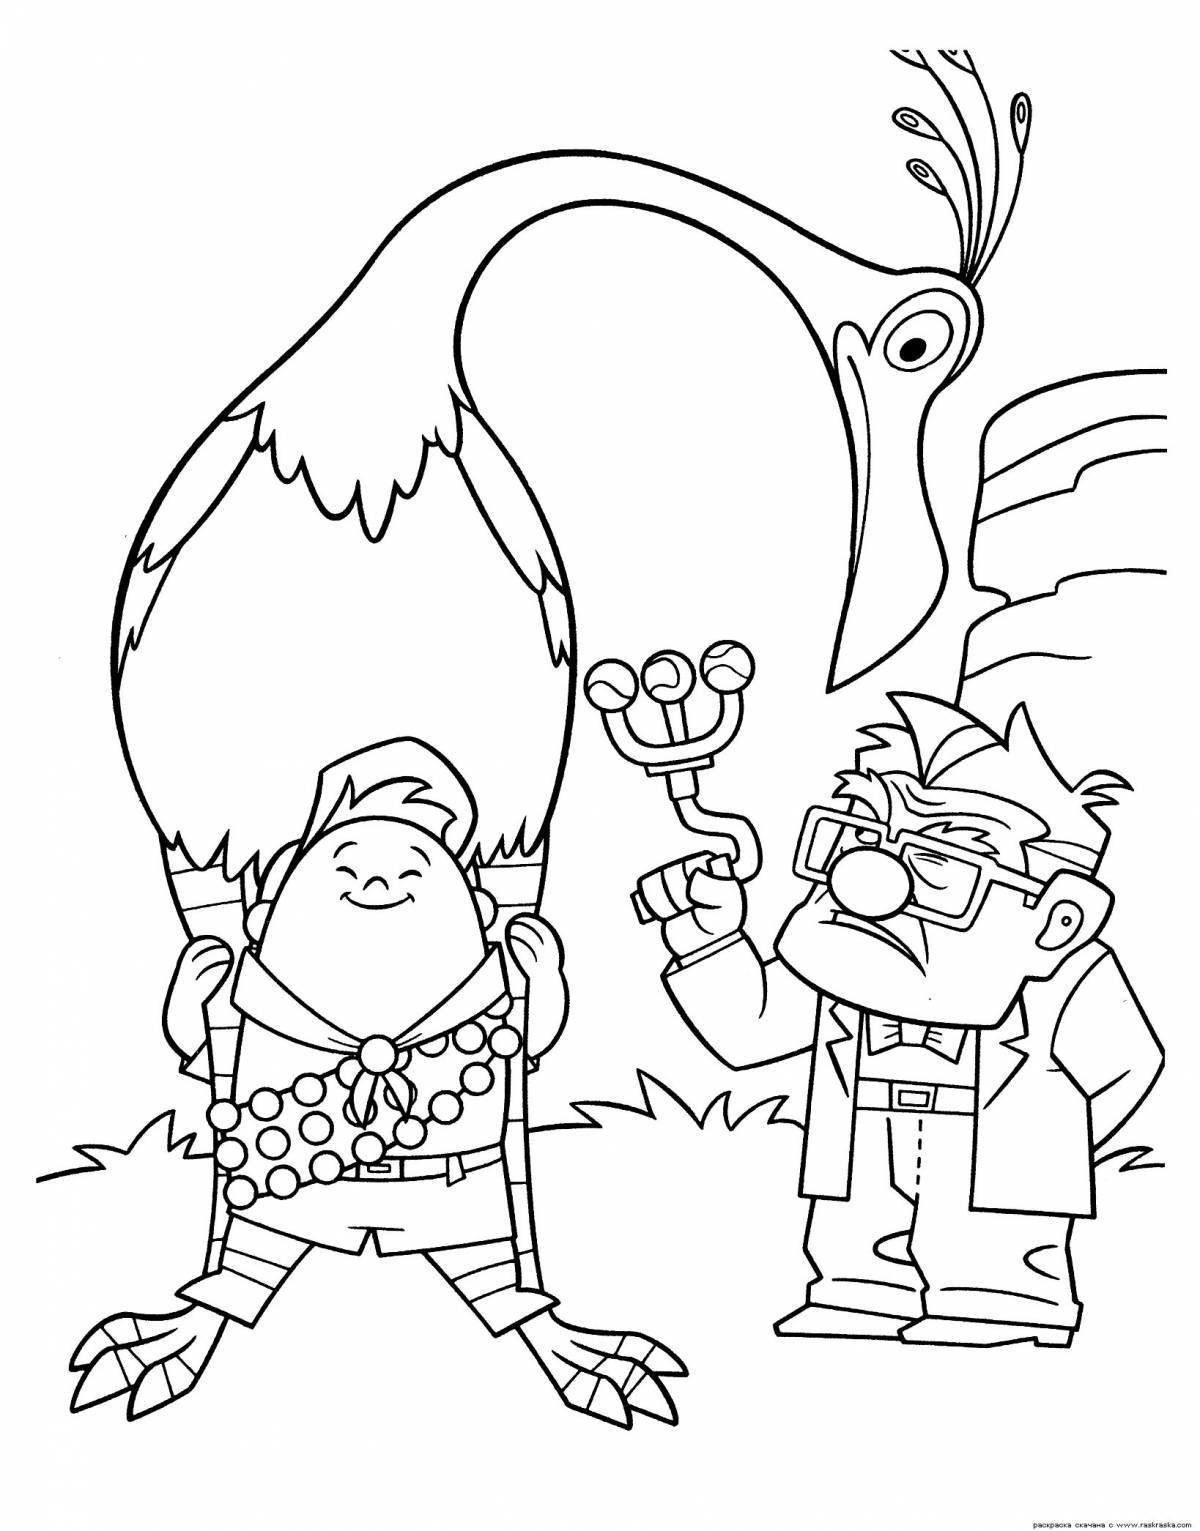 Attractive coloring page up